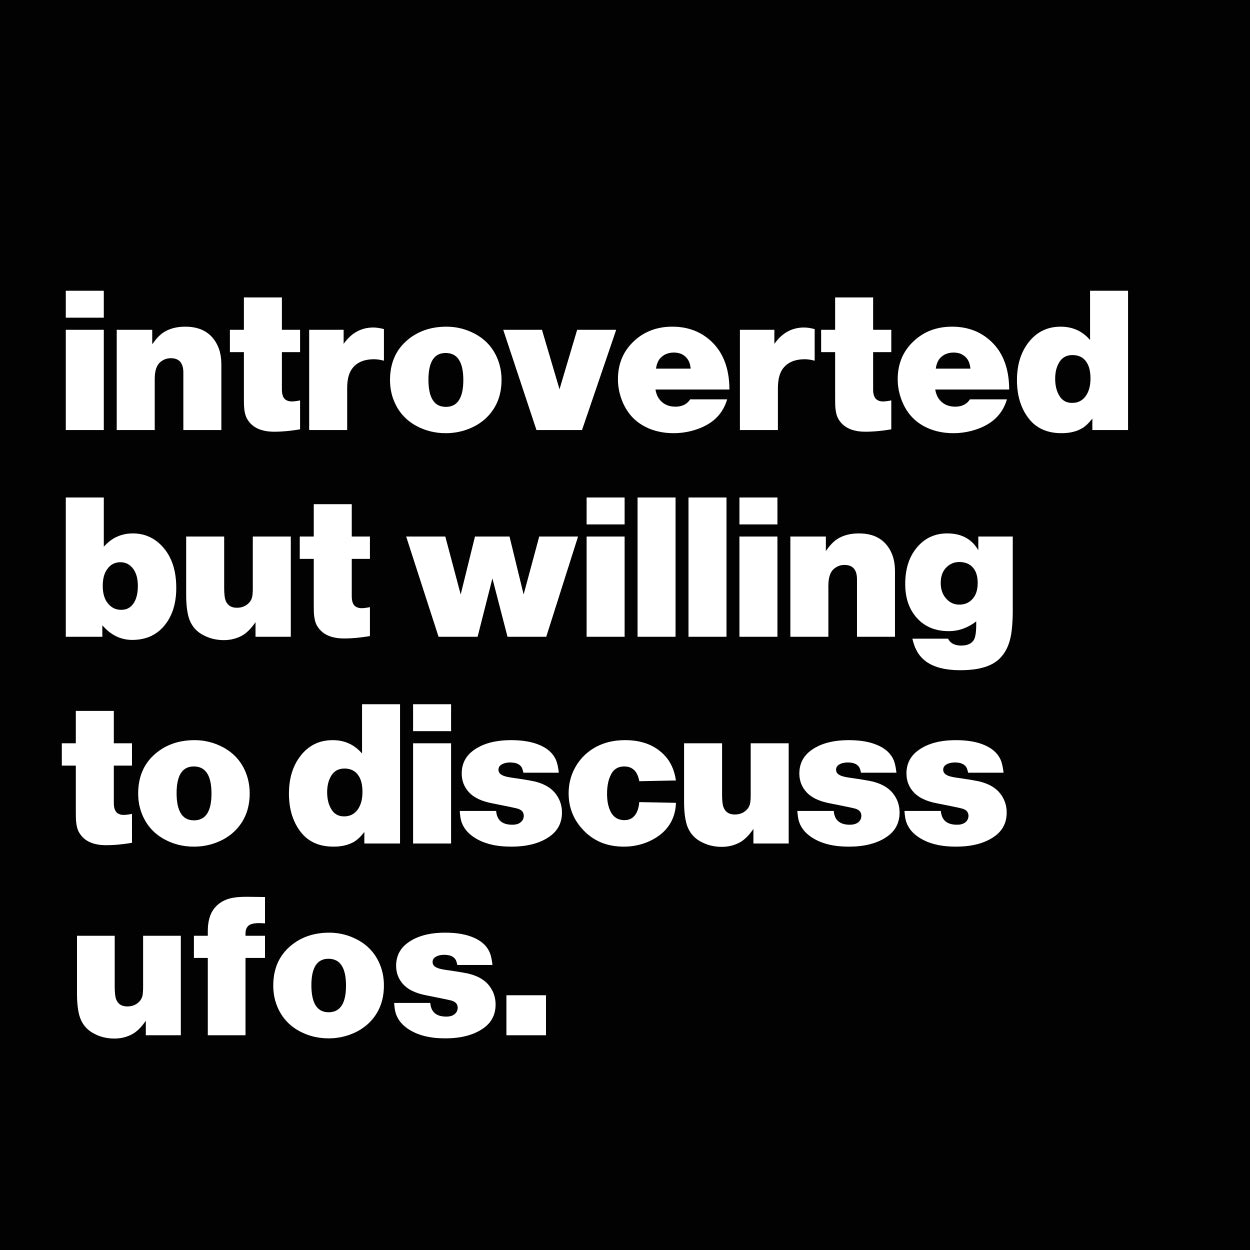 Introverted But Willing To Discuss Ufos Tshirt - Donkey Tees